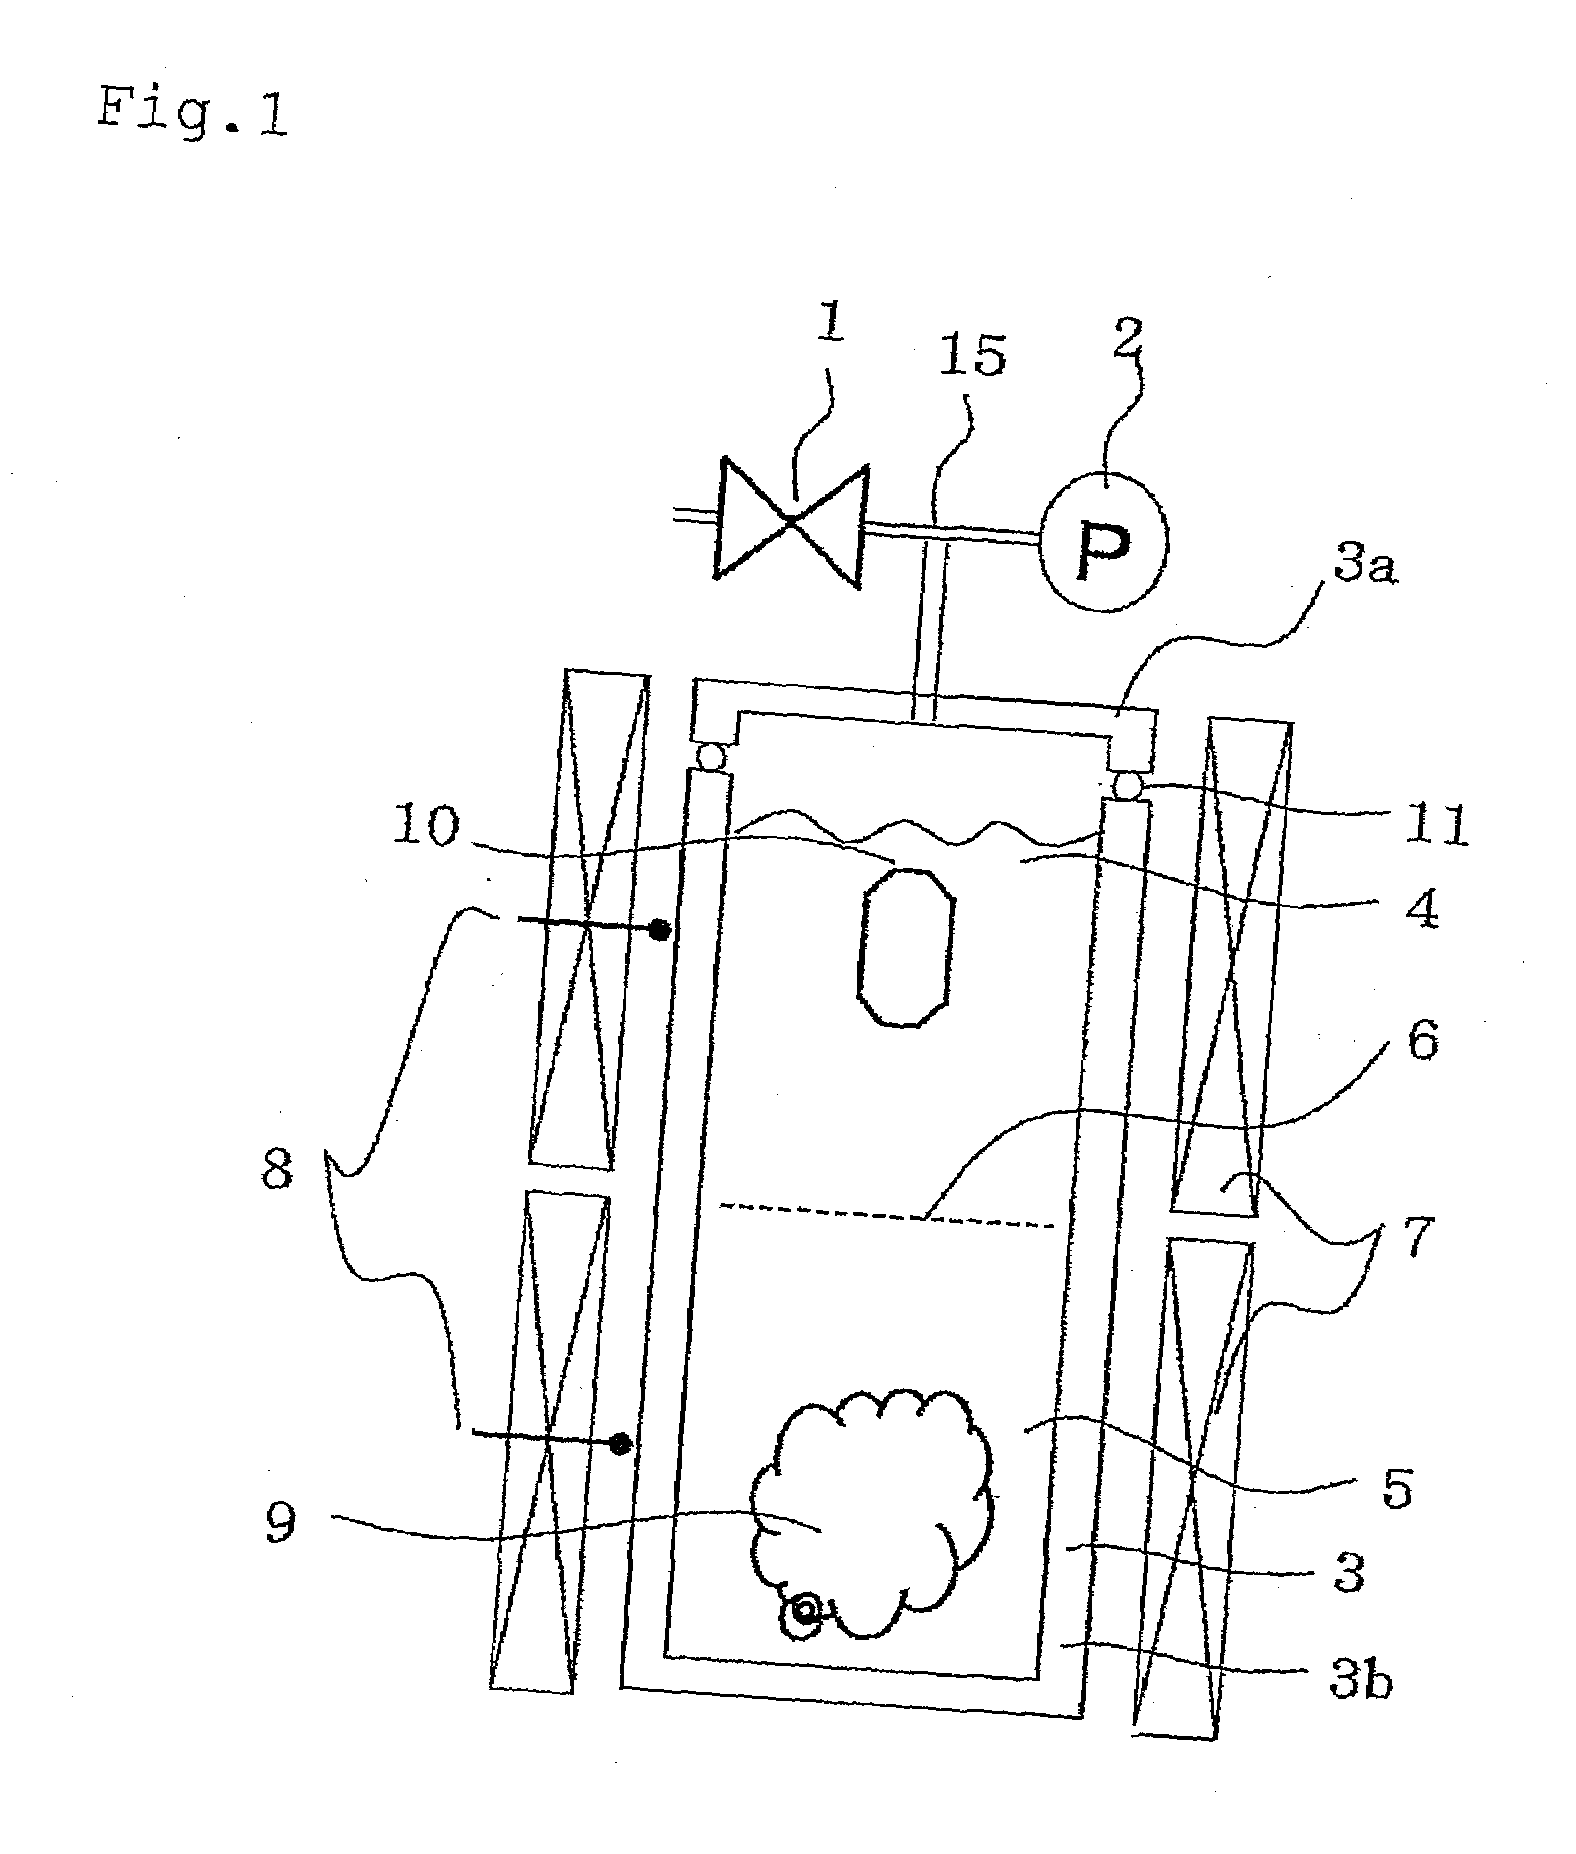 Crystal production process using supercritical solvent, crystal growth apparatus, crystal and device